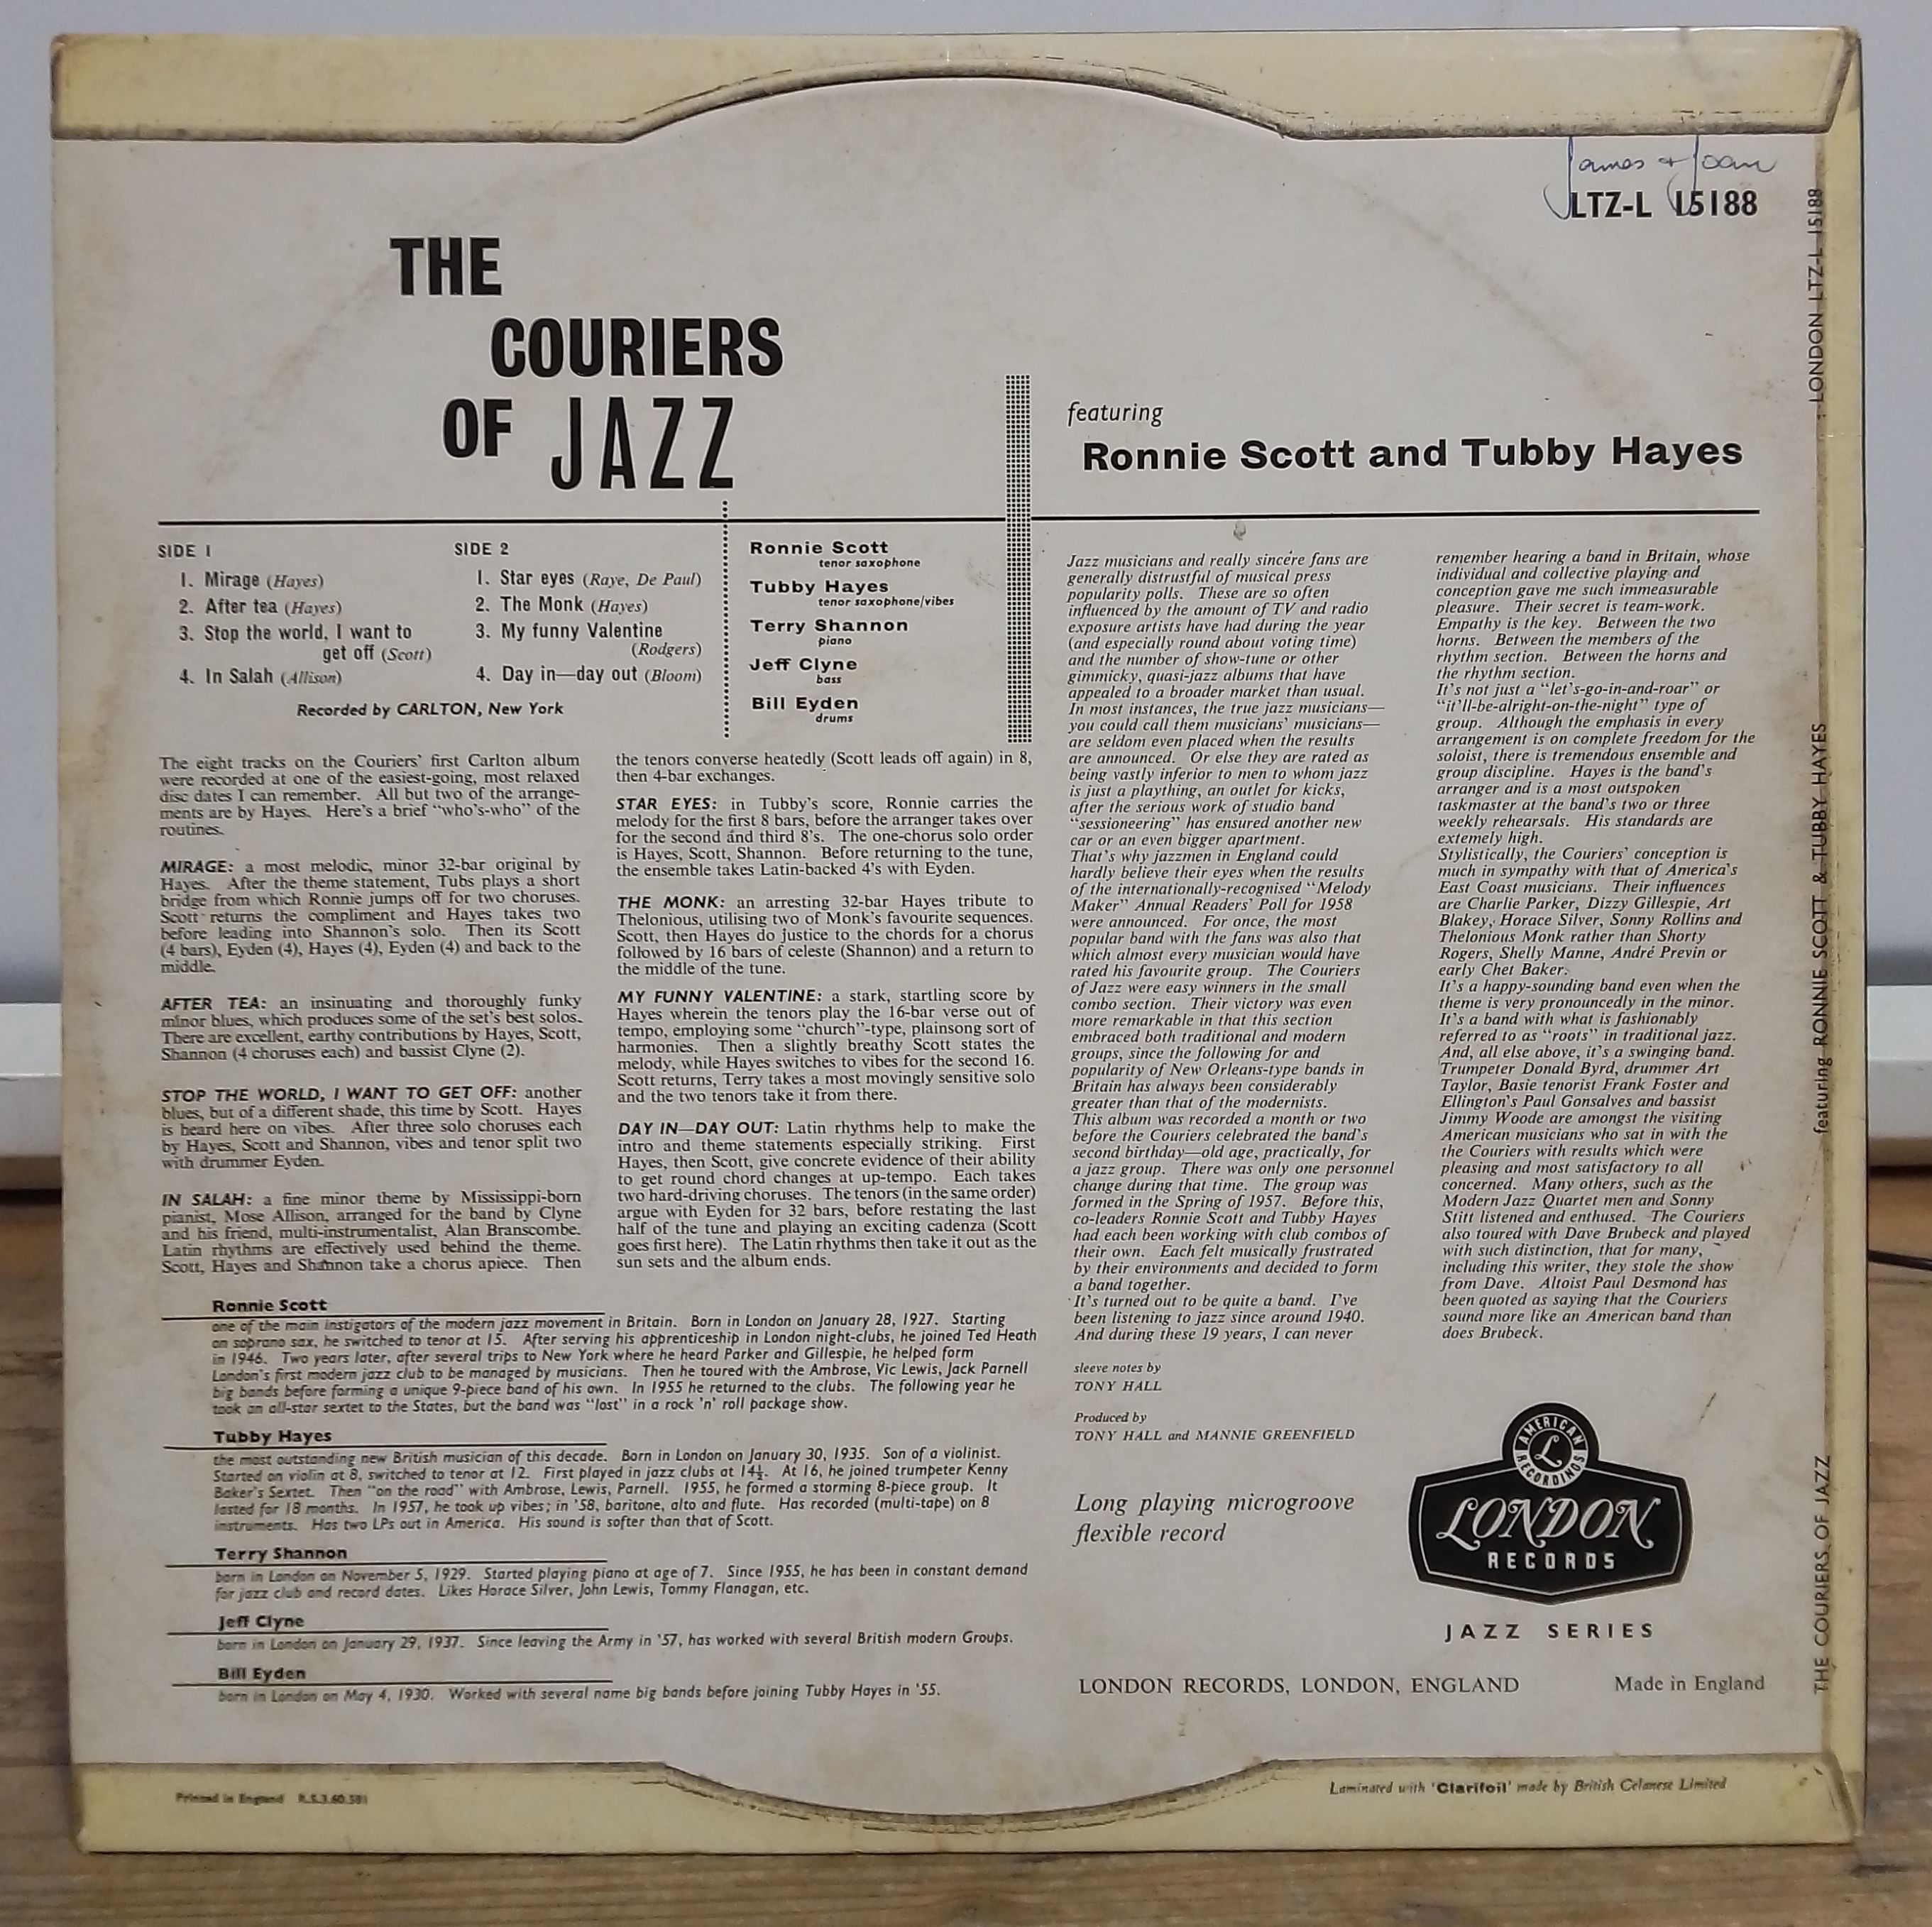 Ronnie Scott & Tubby Hayes - The Couriers of Jazz! mono LP, 1st pressing, UK 1960, London Records - Image 2 of 4